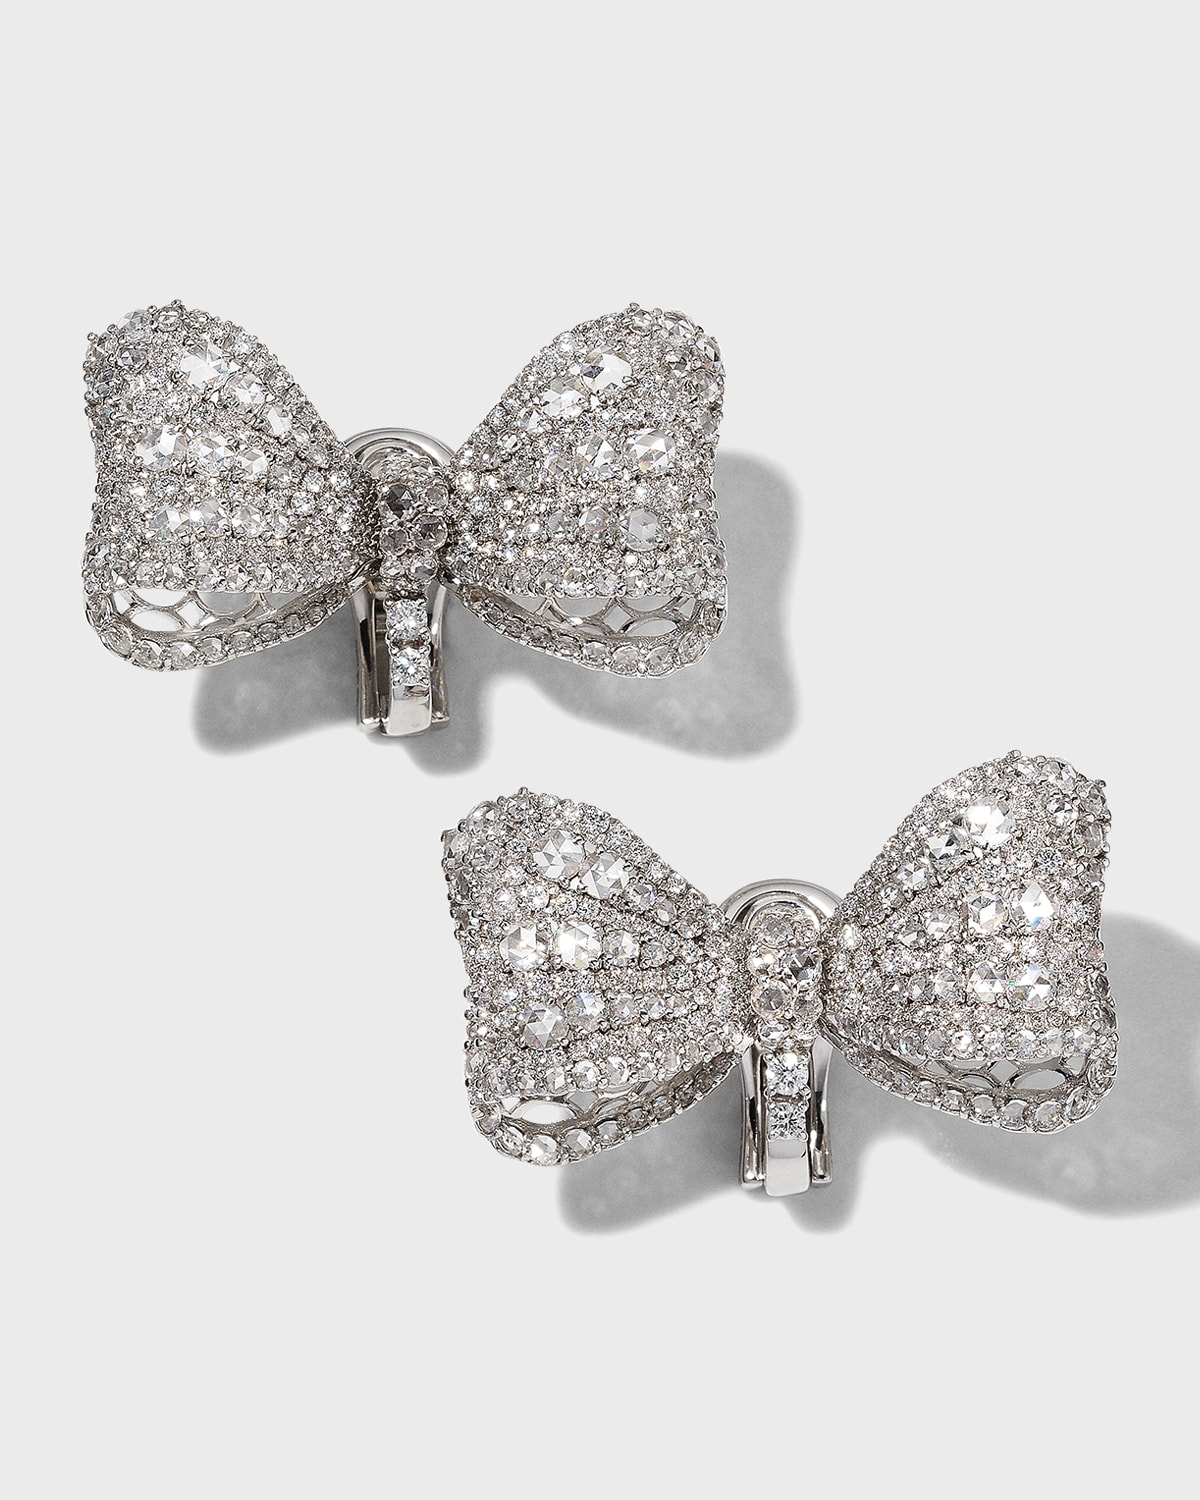 18k White Gold Couture Diamond Bow Earrings